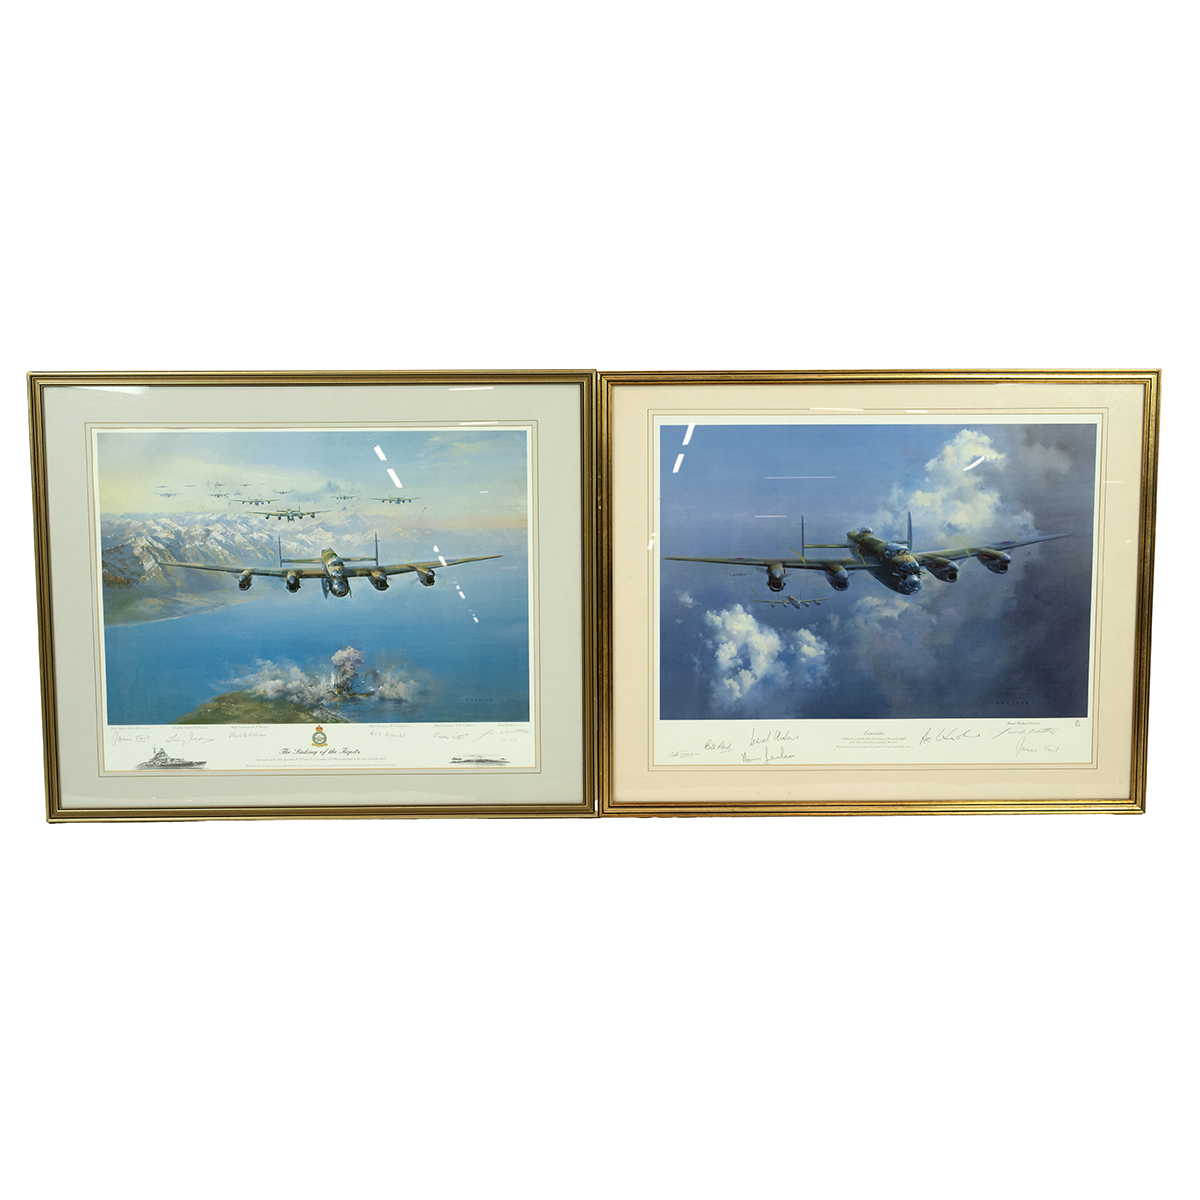 Two (2) Avro Lancaster Bomber art prints by Frank Wootton, both signed limited editions showing S...